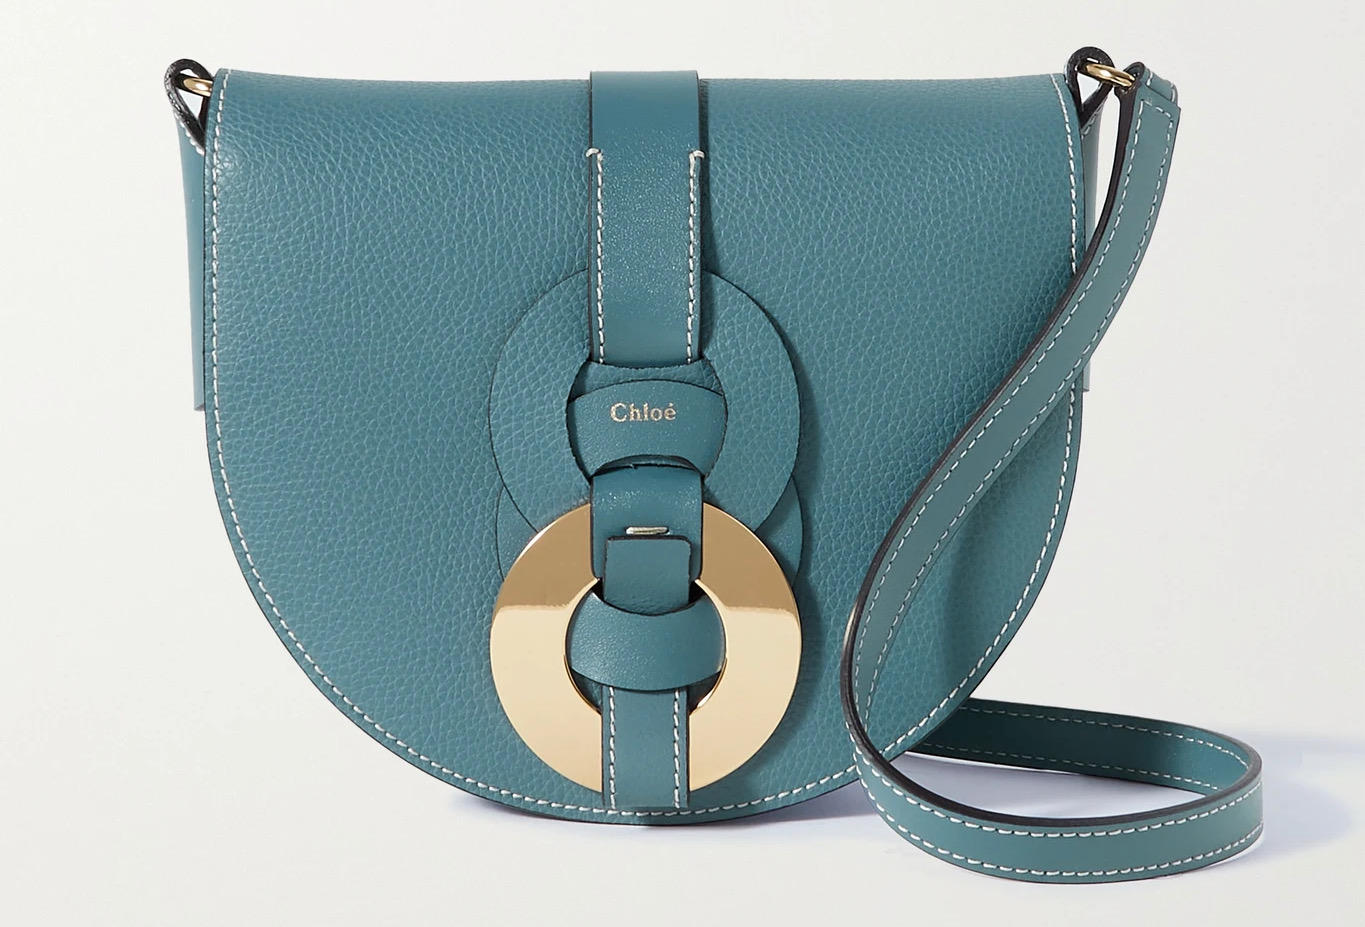 Habitually Chic® » The Best Crossbody Bags for Spring and Summer